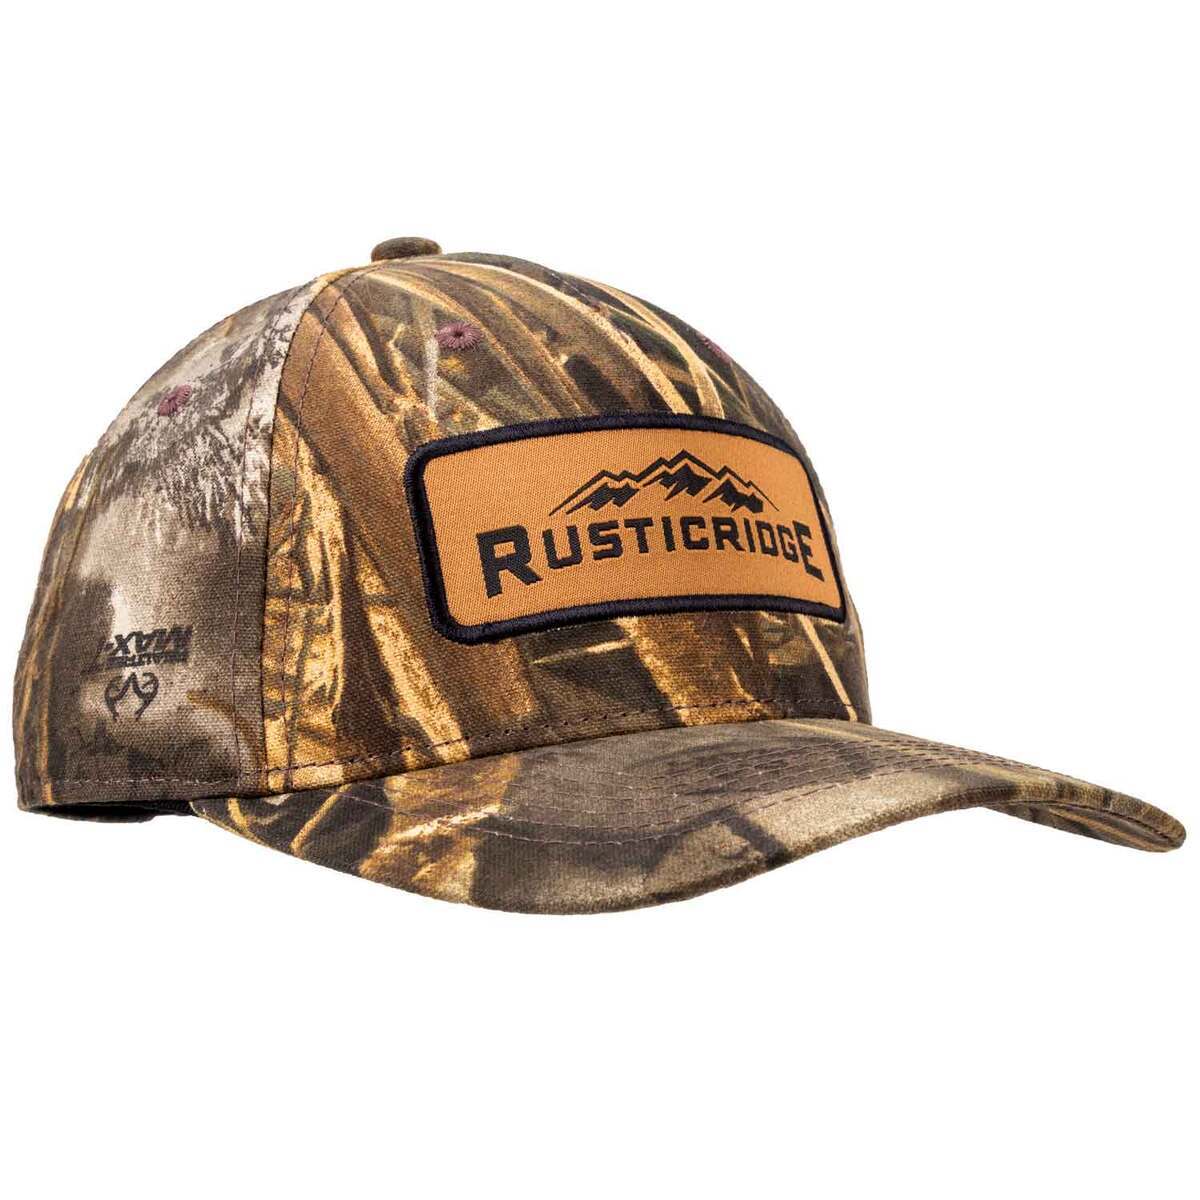 Rustic Ridge unisex Max-7 Solid Camo Adjustable Hat - Realtree Max-7 One Size Fits Most by Sportsman's Warehouse